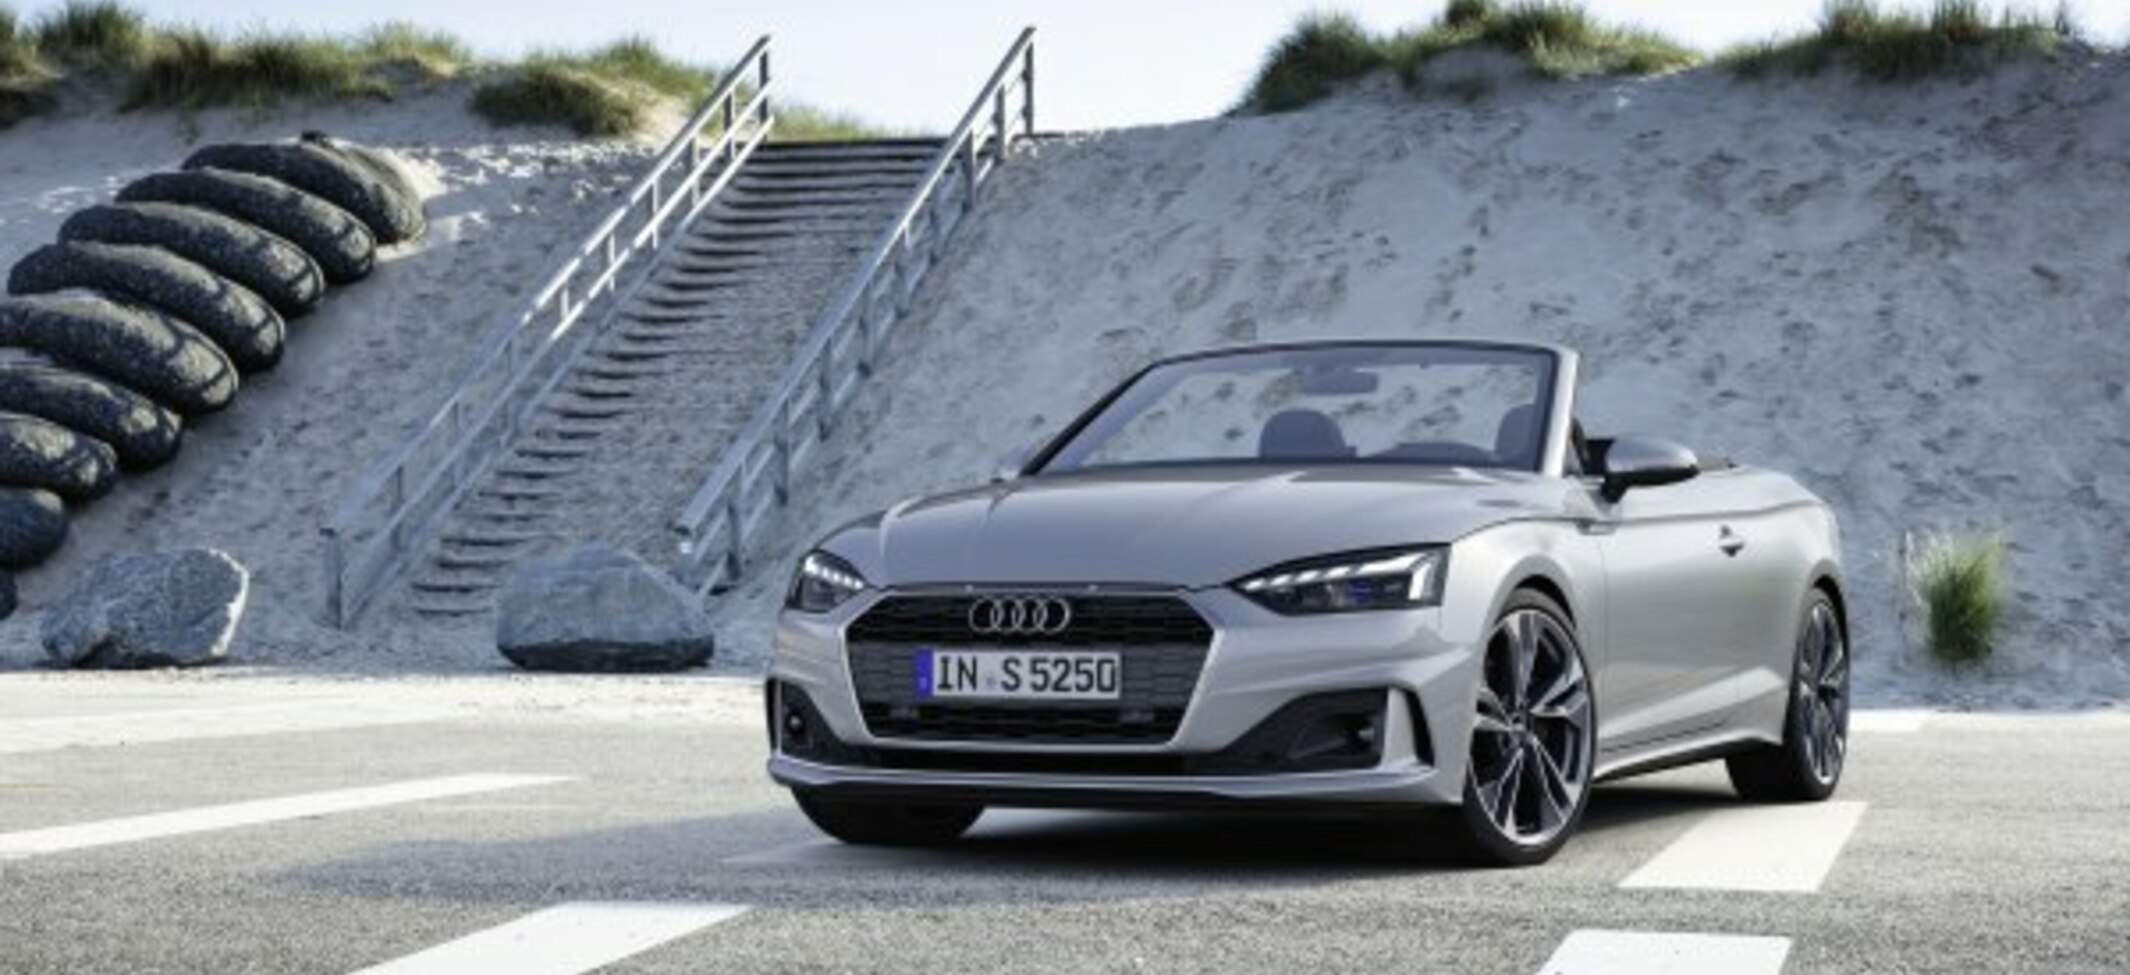 Audi A5 Cabriolet (F5, facelift 2019) 40 TFSI (204 Hp) MHEV quattro S tronic 2020, 2021 